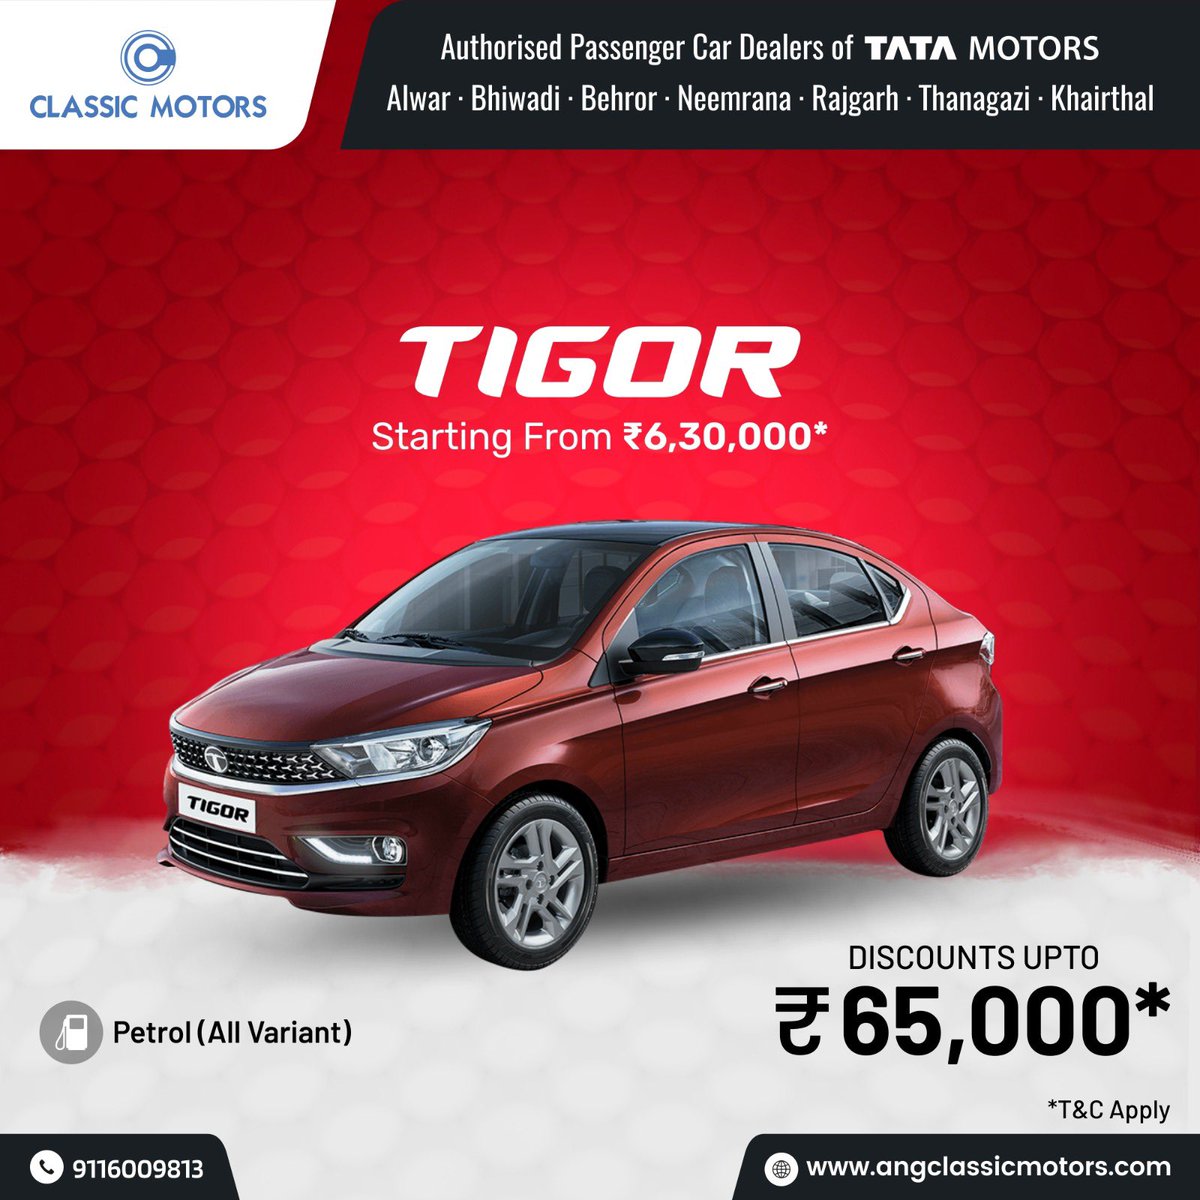 Rev up your savings! Tata Tigor now available with discounts up to ₹65,000.

Book your test drive now: 9116009813

#tatamotors #tatamotorsindia #classicmotors #TataTigor #Discounts #SavingsOnWheels #CarDeals #LimitedTimeOffer #DriveHomeHappy